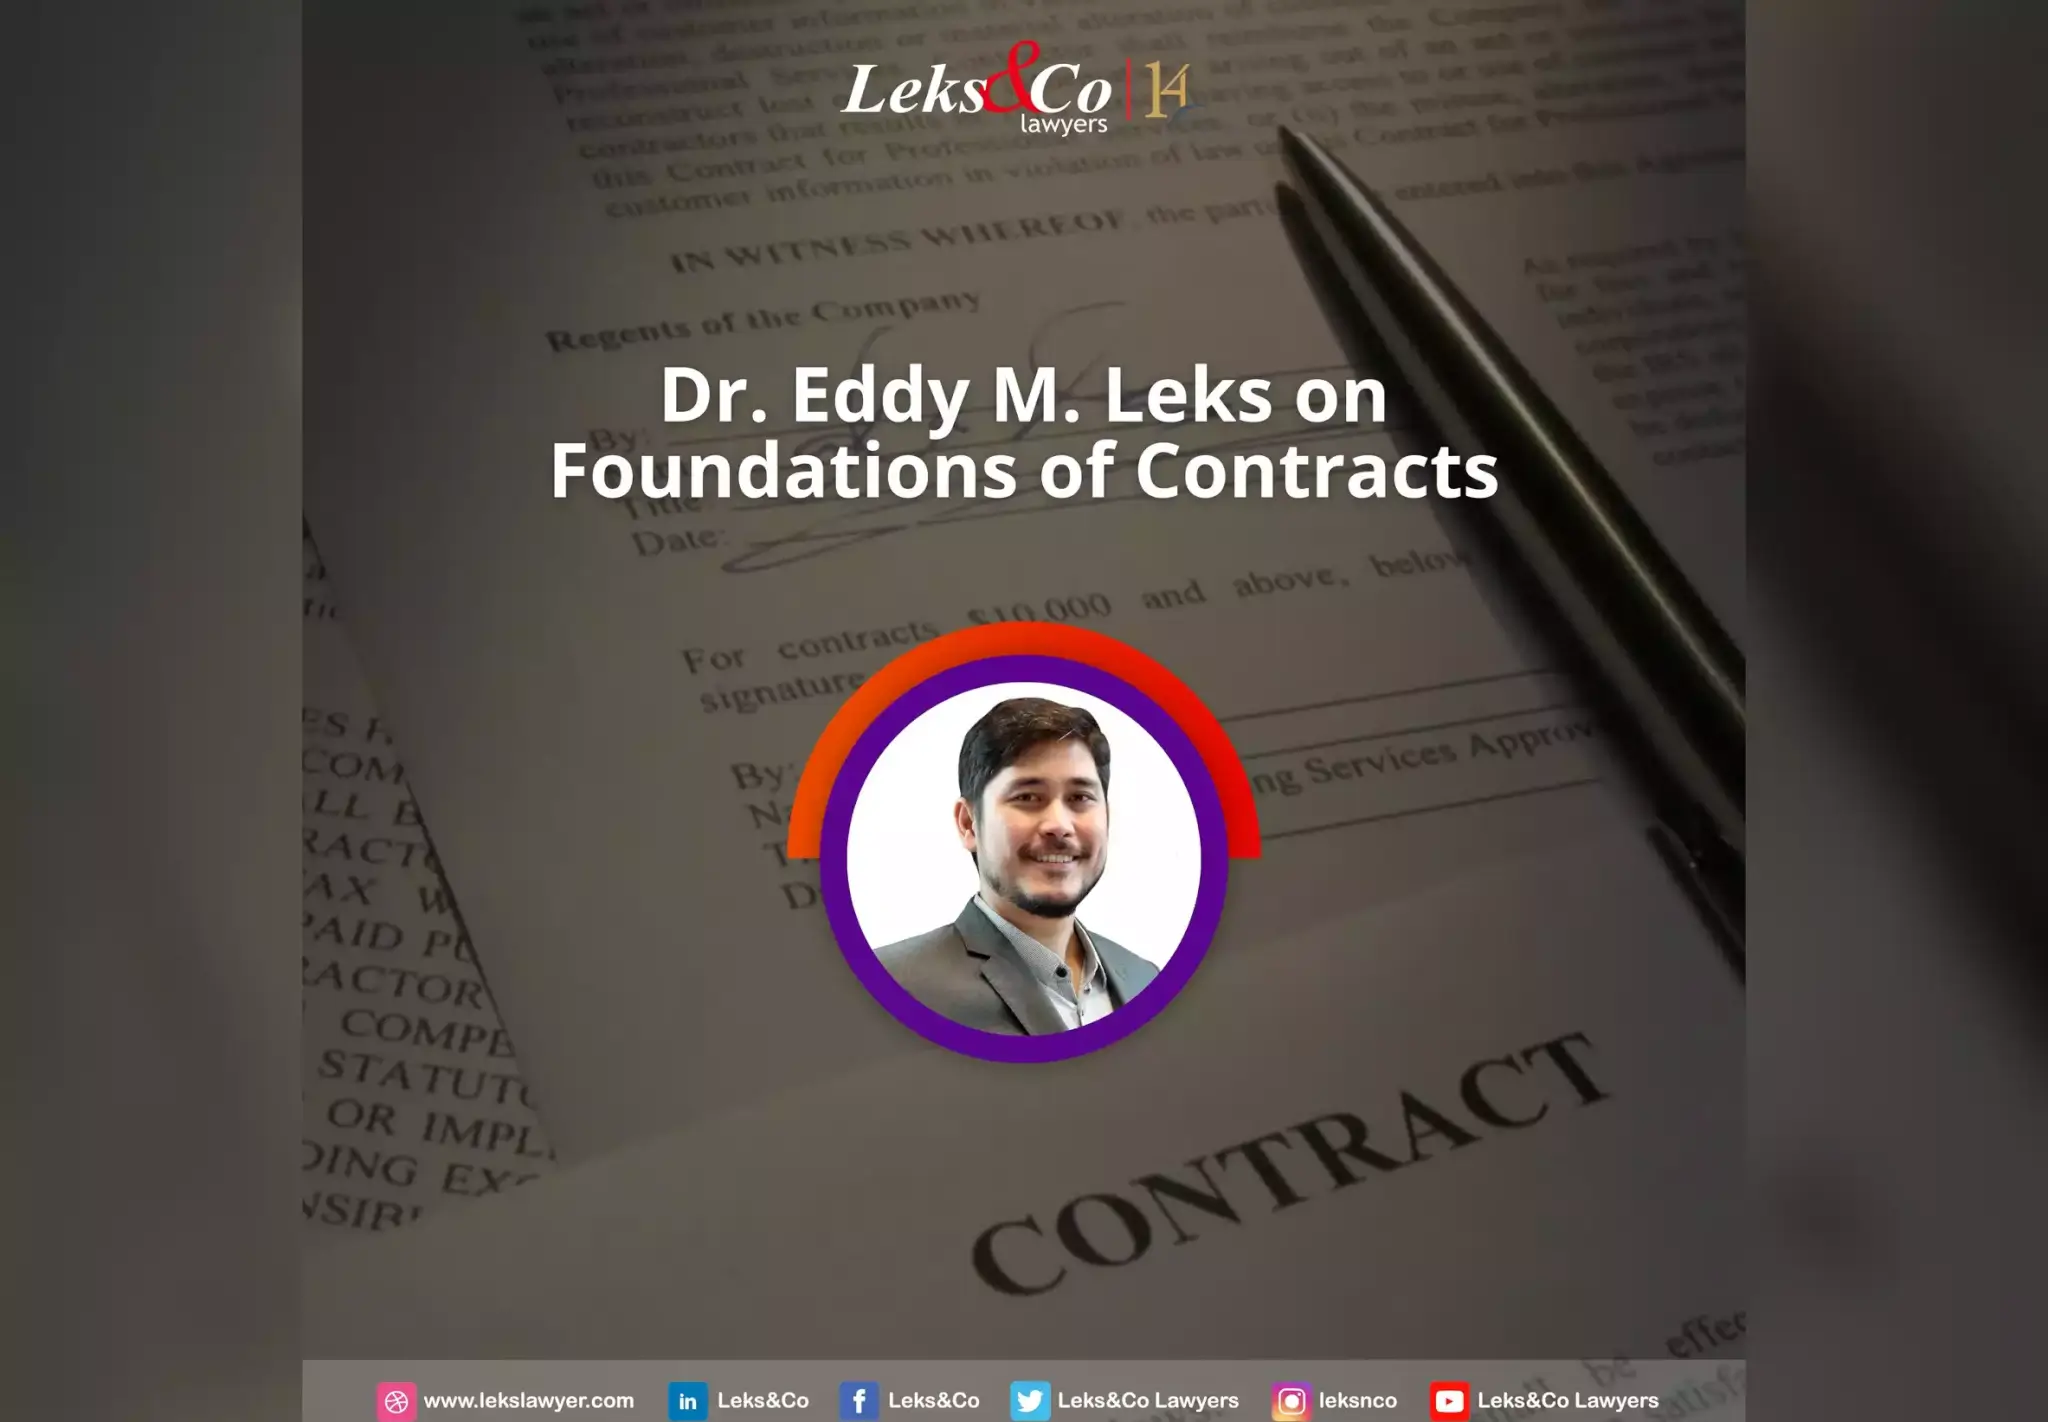 Dr. Eddy M. Leks on Foundations of Contracts